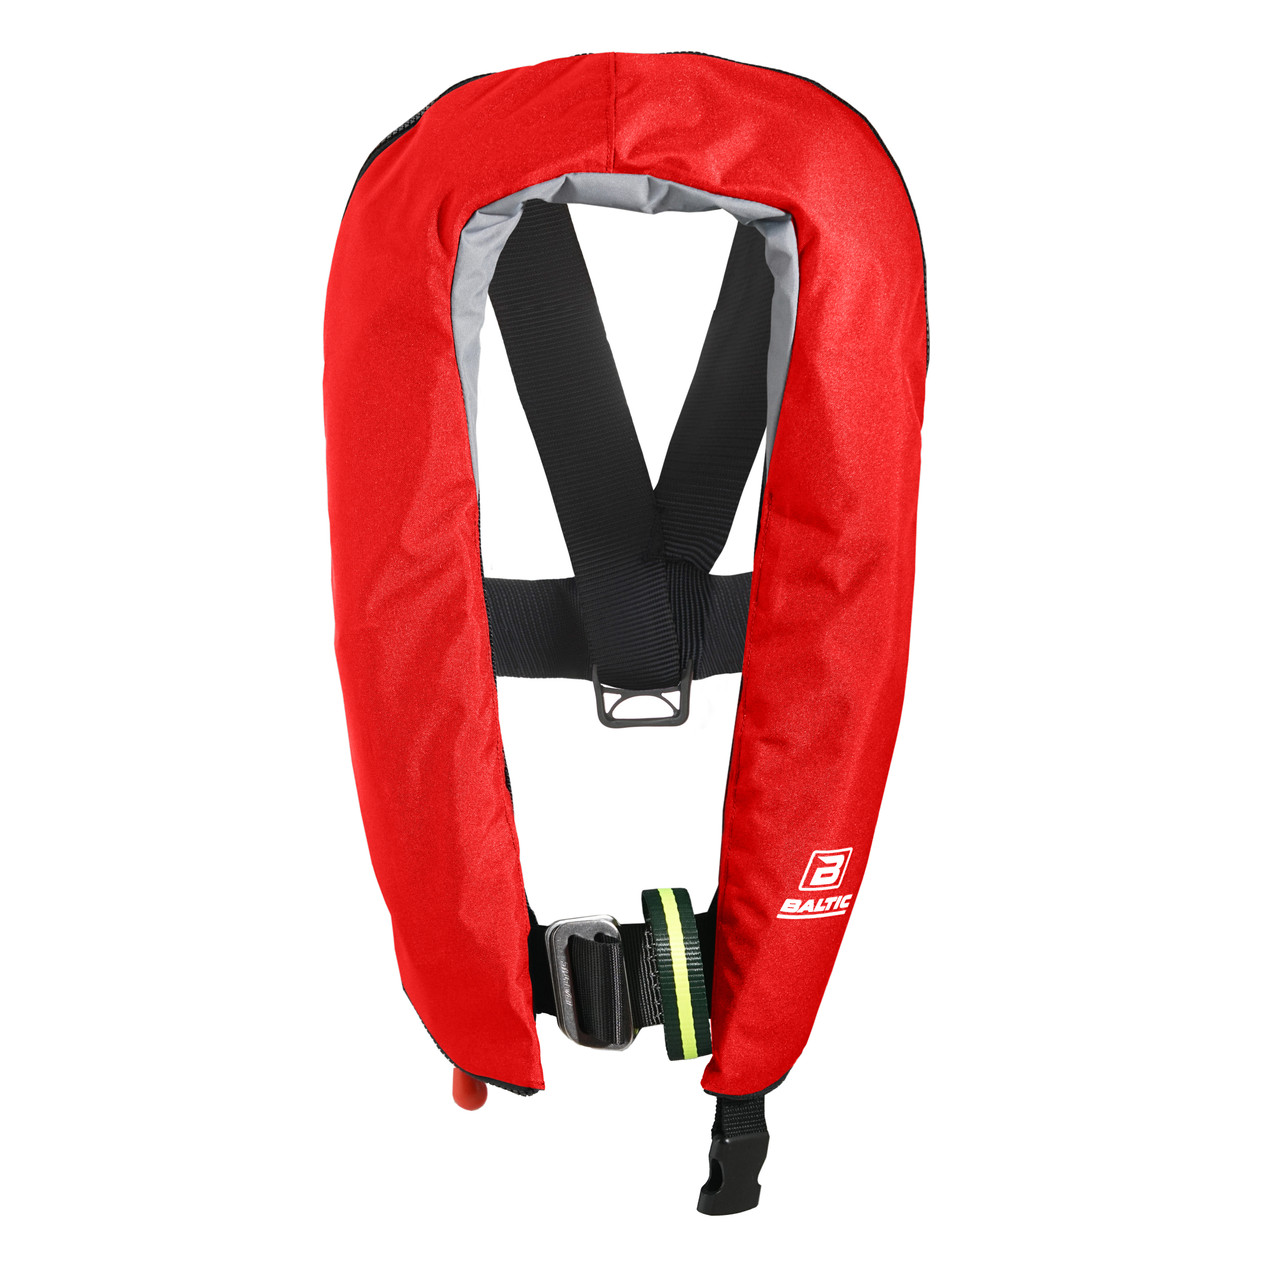 Baltic Breeze 165N Auto Inflatable Lifejacket with Harness - Red